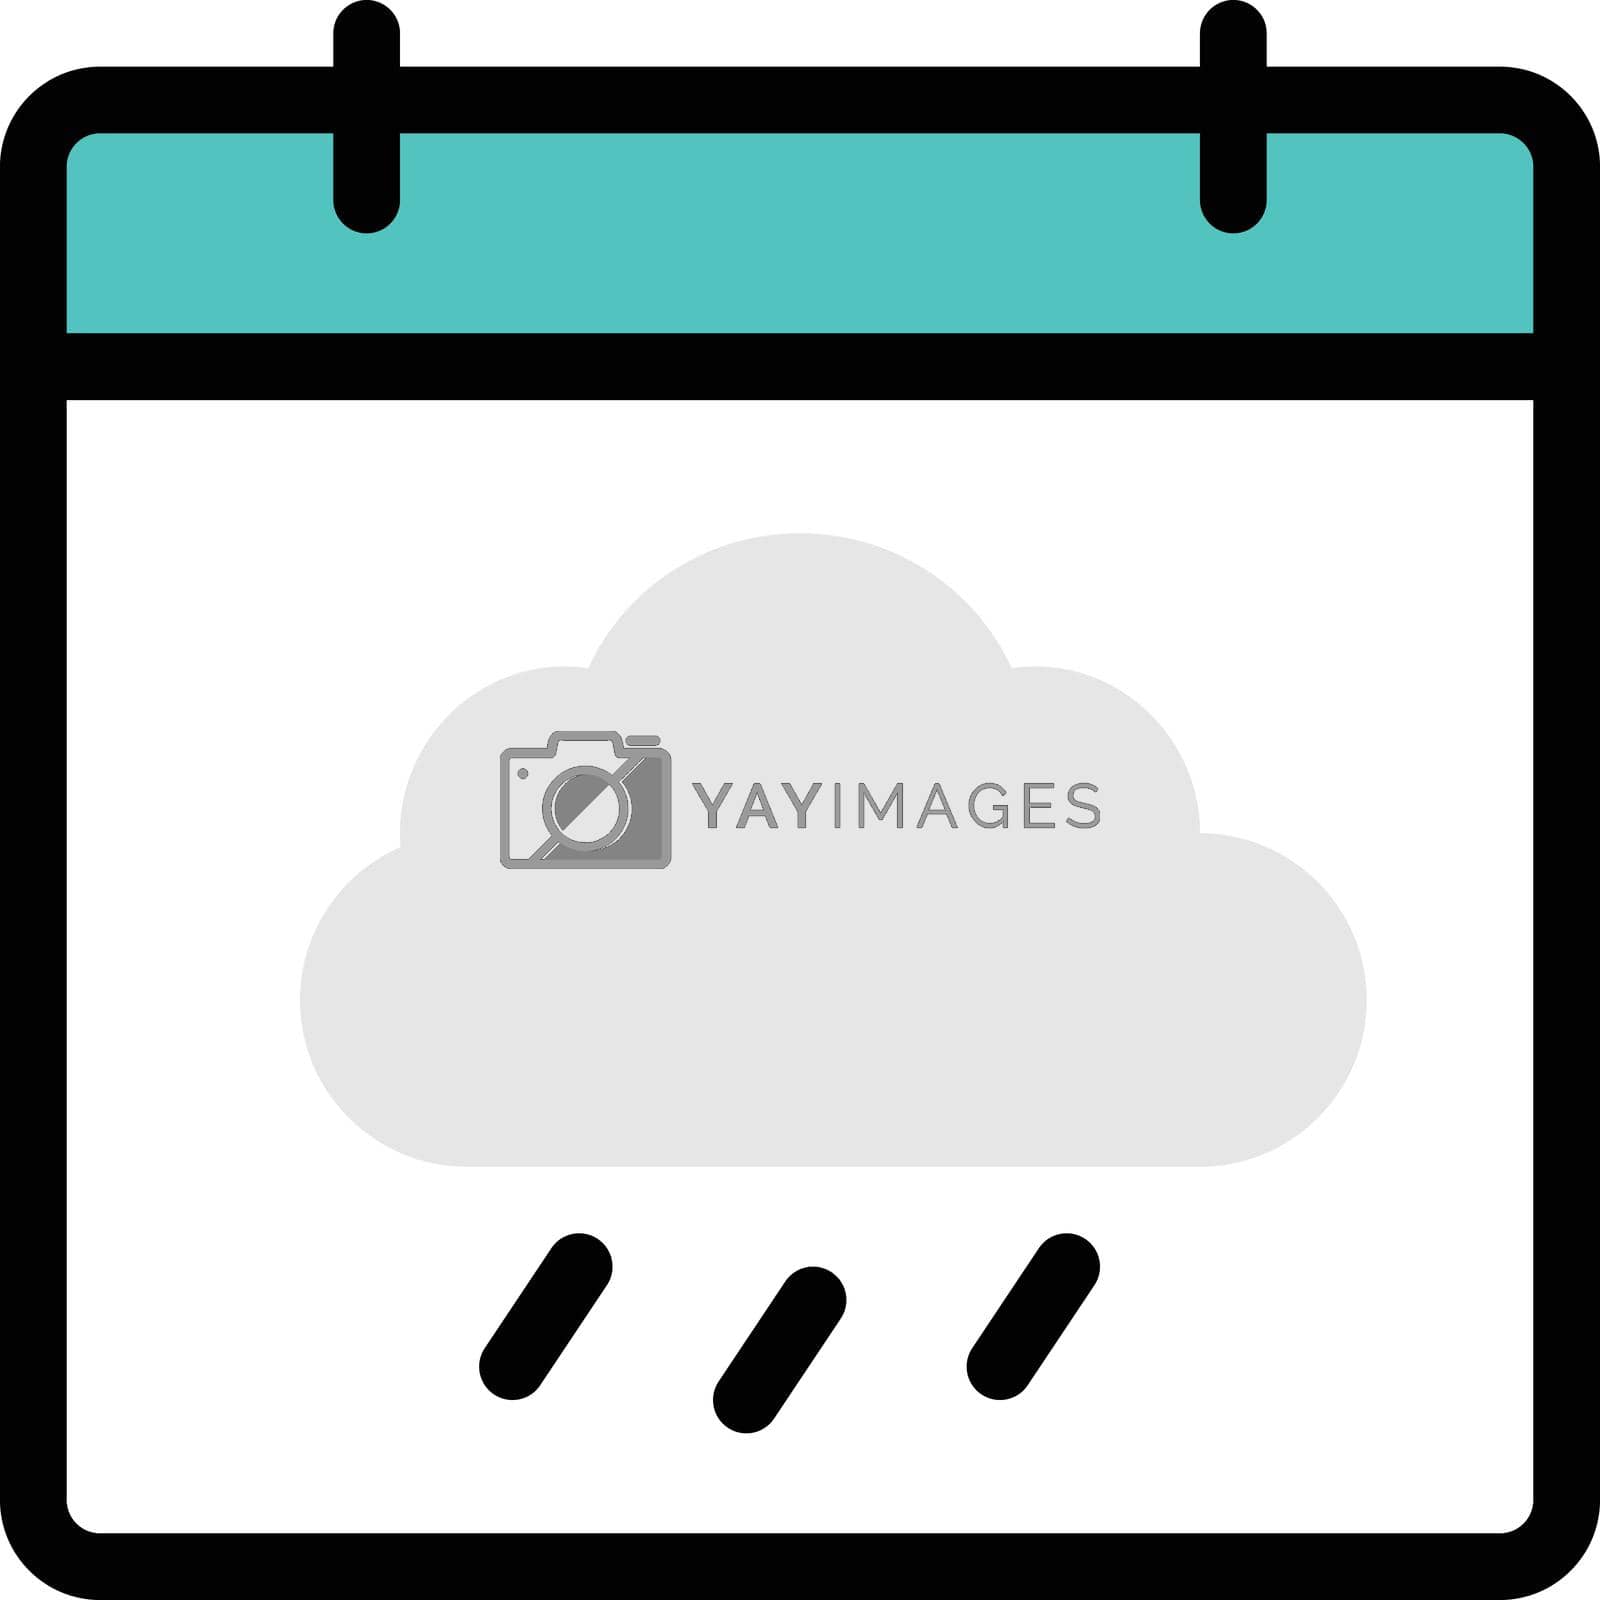 Royalty free image of cloud by vectorstall